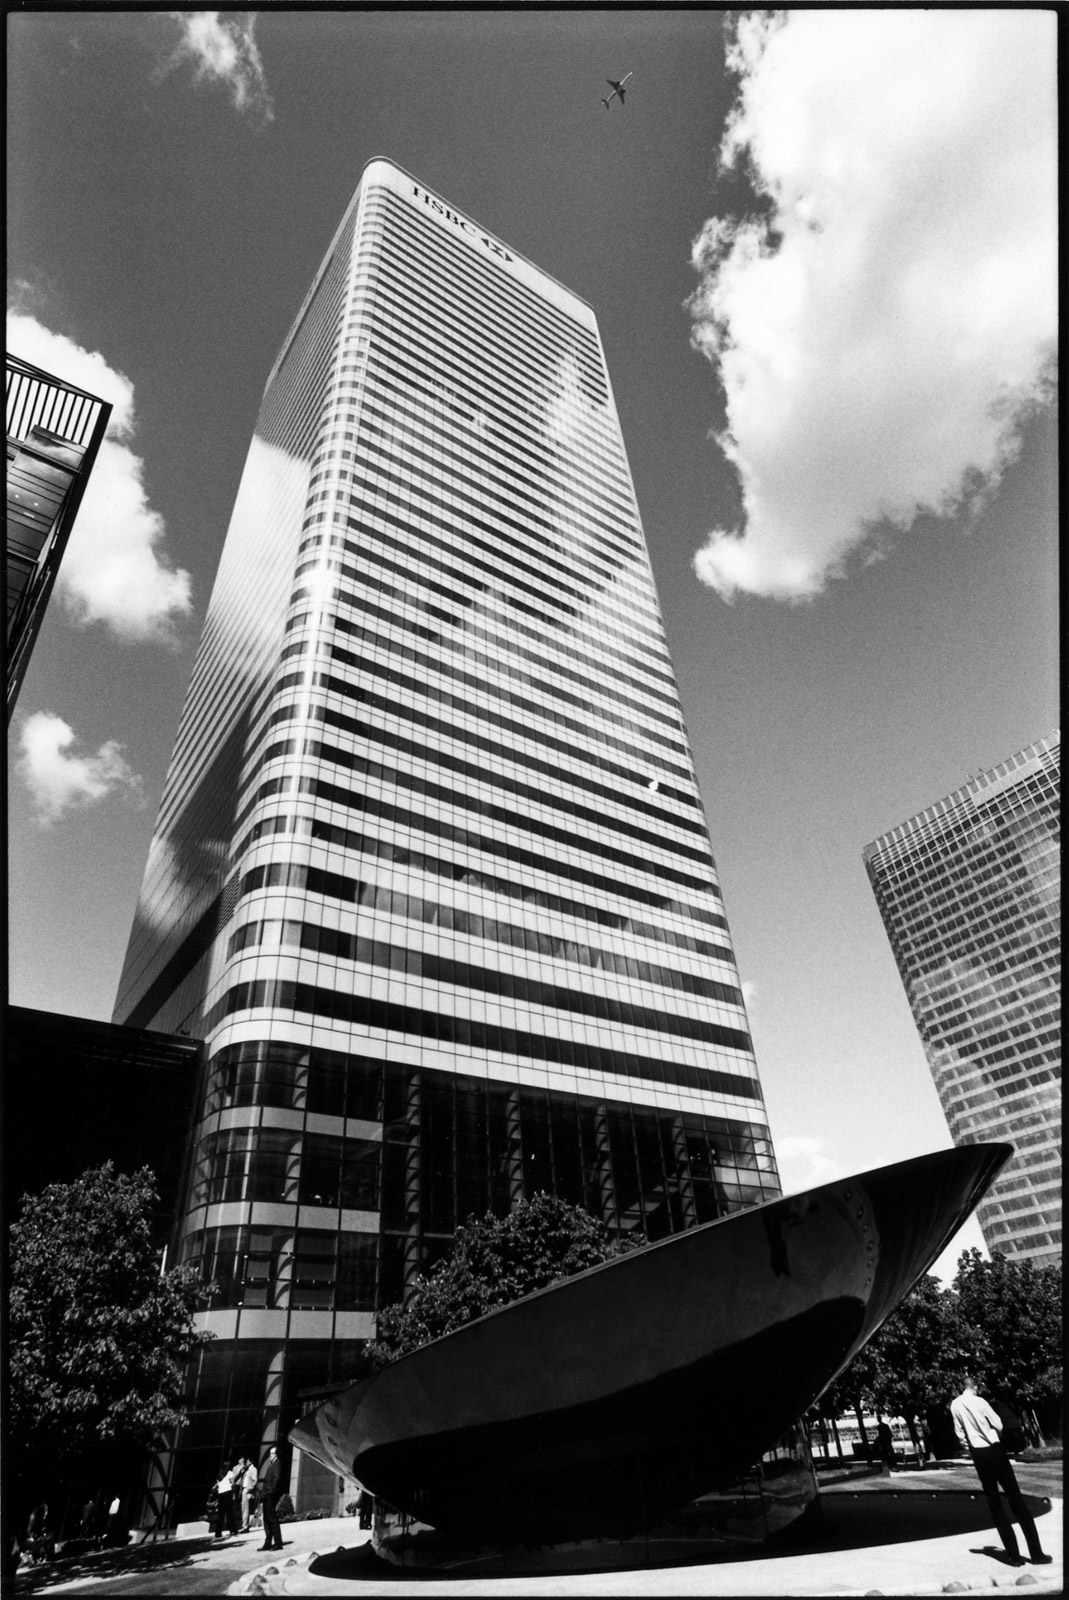 HSBC tower in Canary Wharf, London, 2005